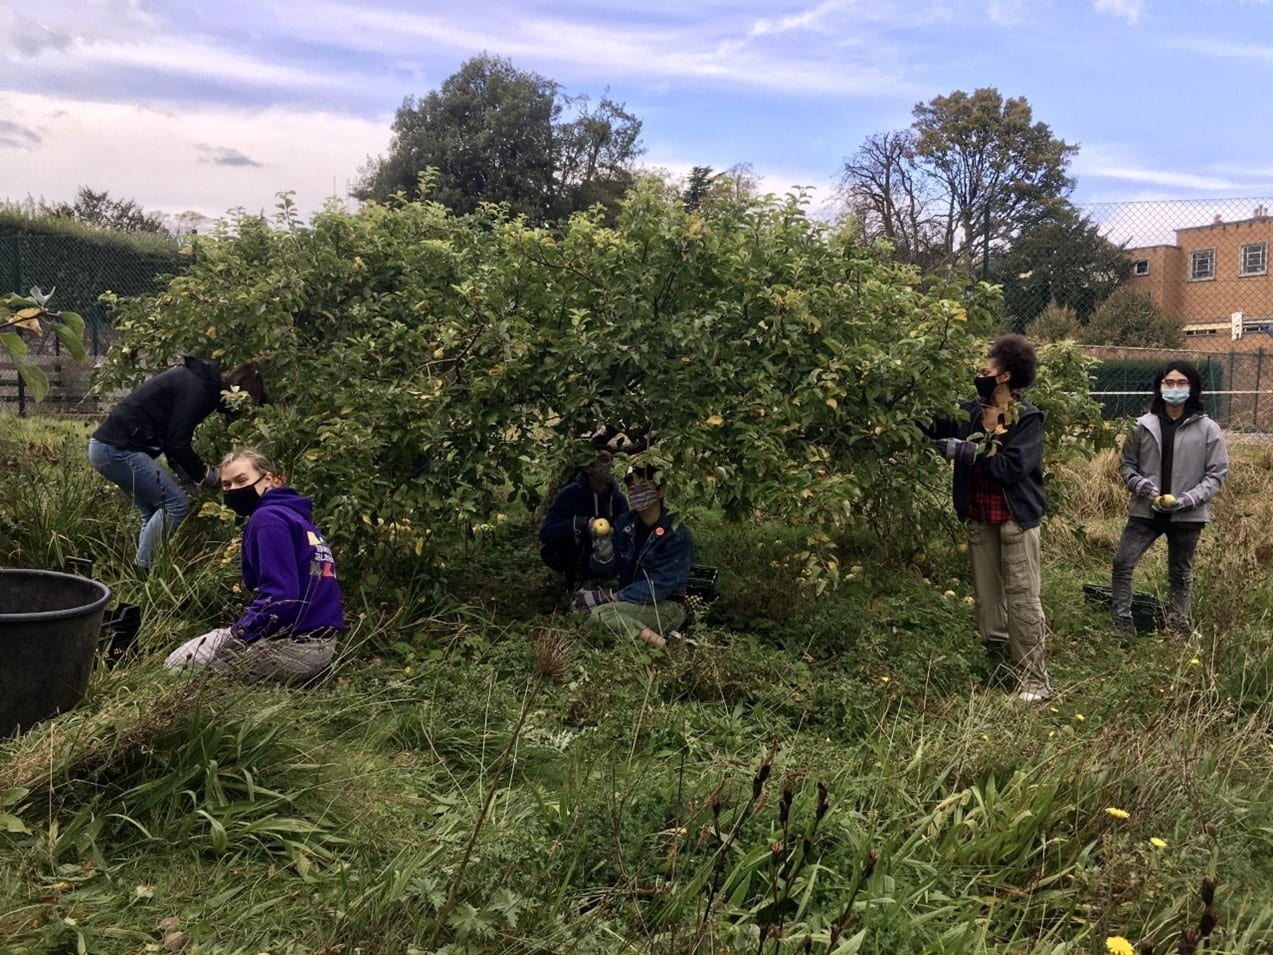 Students harvesting apples in Goldney Hall Heritage Orchard in October 2020.